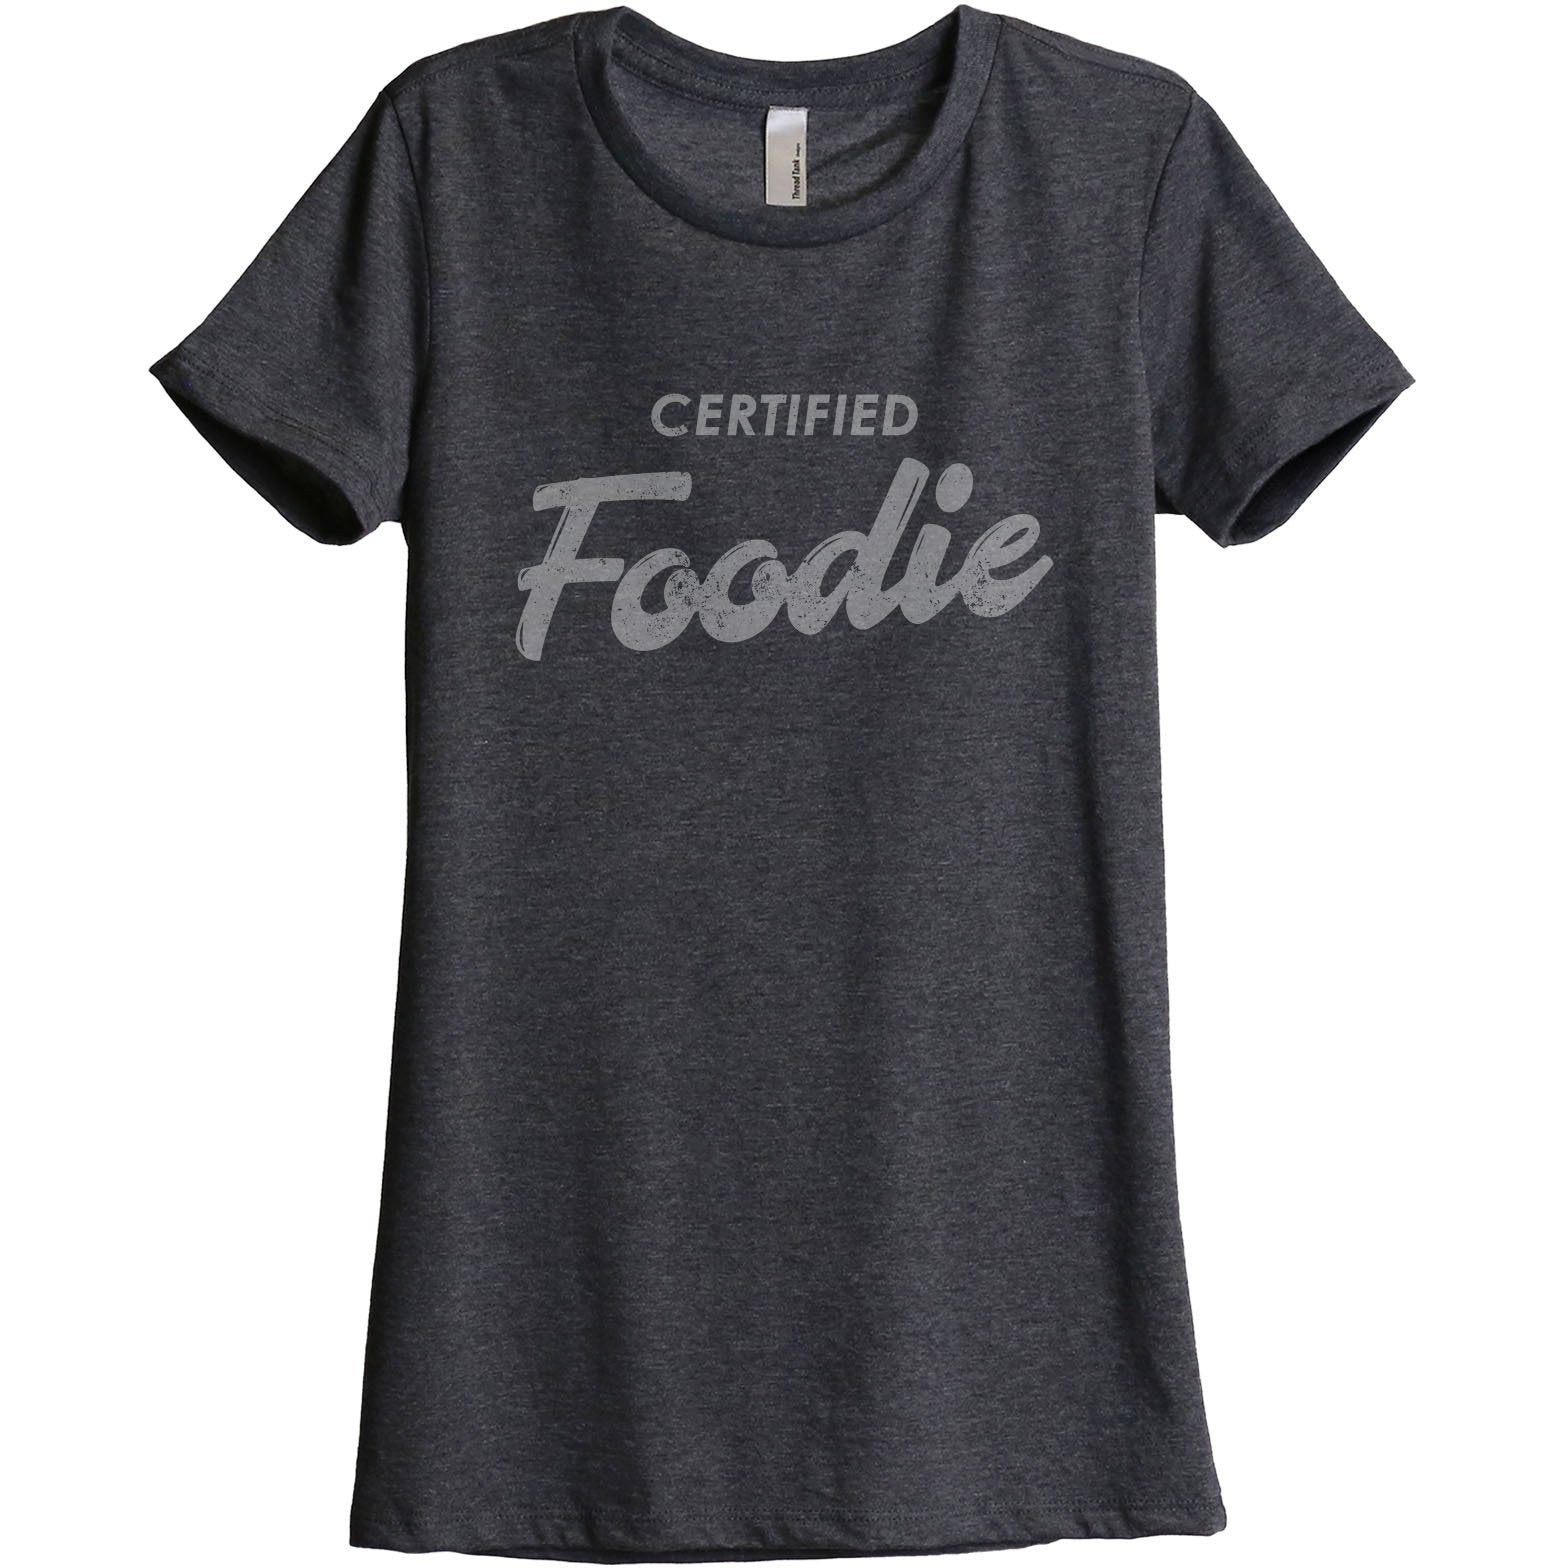 Certified Foodie - Thread Tank | Stories You Can Wear | T-Shirts, Tank Tops and Sweatshirts